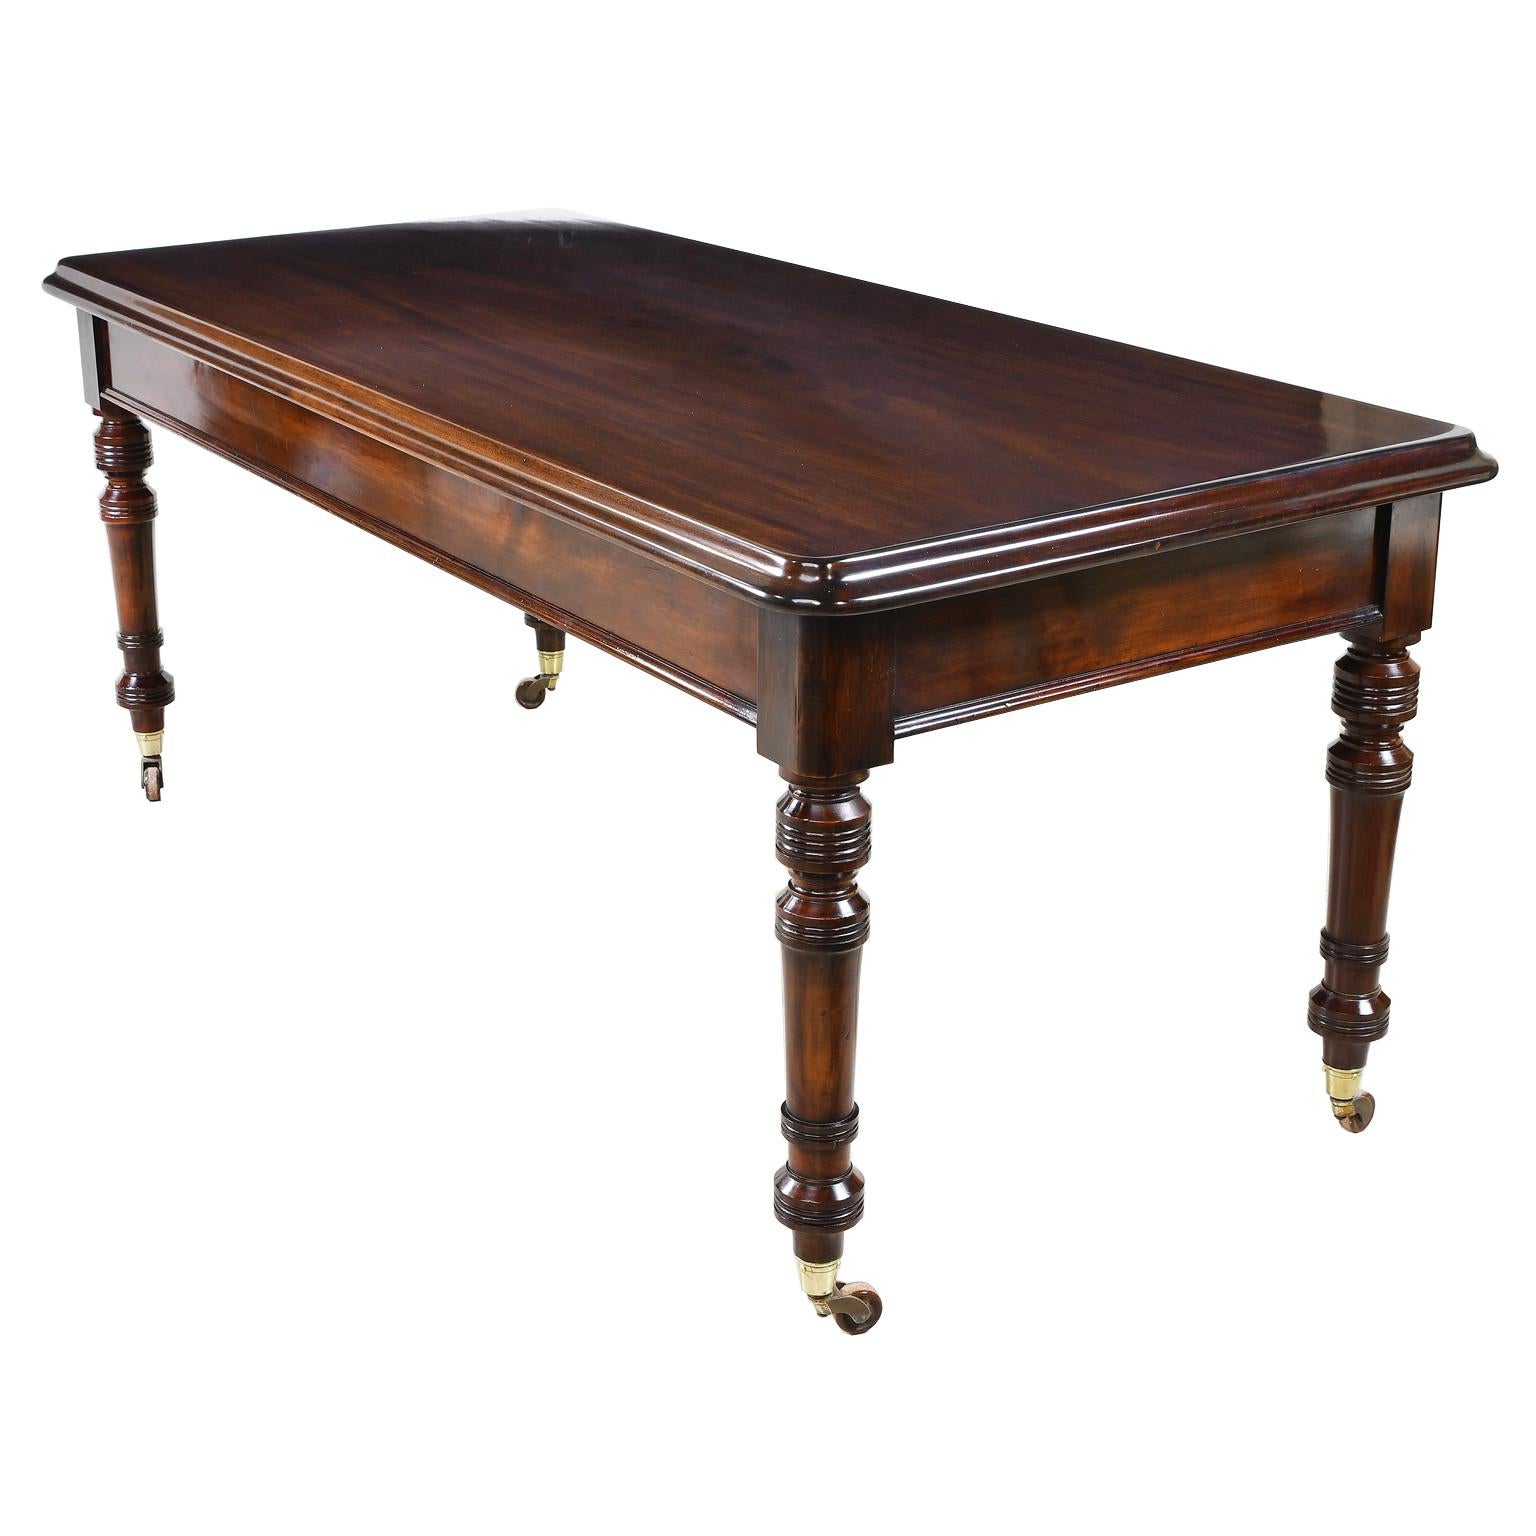 Elegant with a contemporary line this early Victorian or late William IV mahogany library table, circa 1840 has an understated elegance. The crisply turned legs, basic apron and deep ogee edge in the thick mahogany top all lend to its pleasing